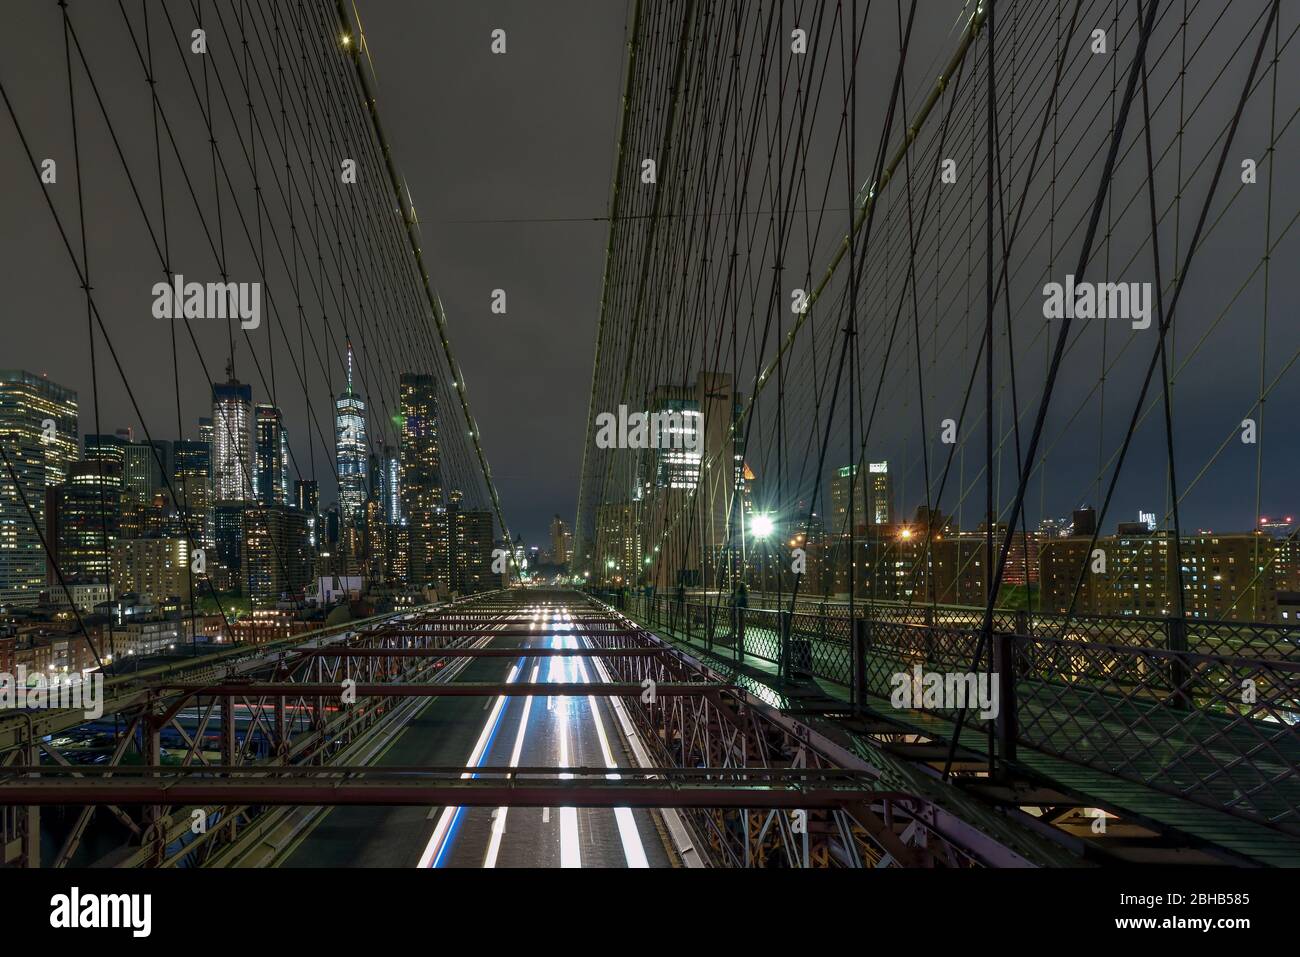 View over the Brooklyn Bridge At night to the illuminated skyscrapers in Manhattan Stock Photo